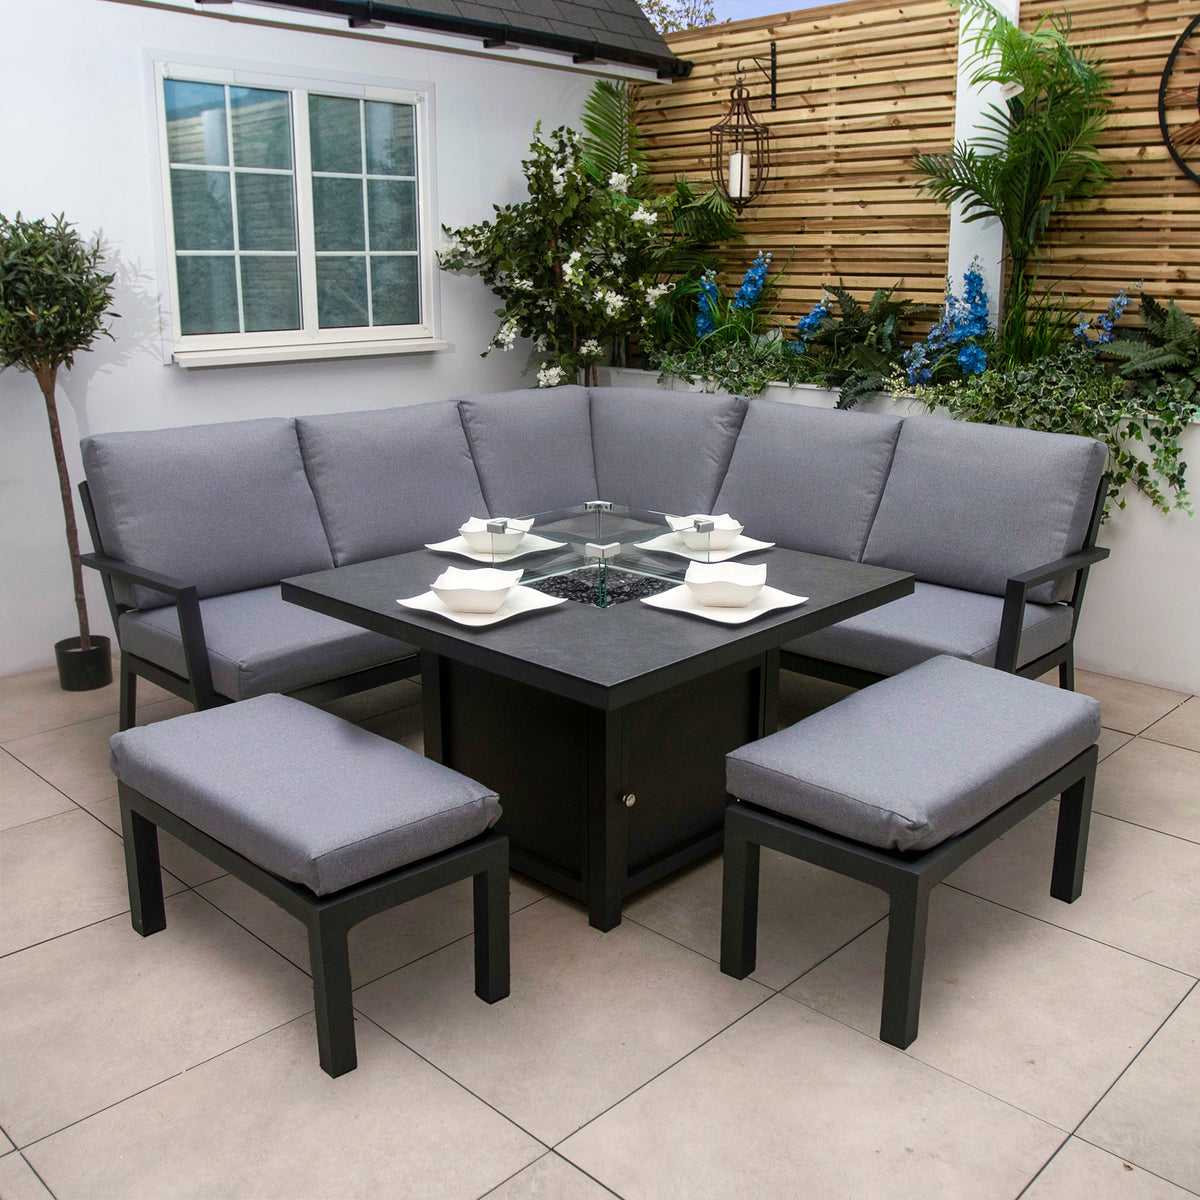 Bracken Outdoors Miami Dark Aluminium Compact Corner Set with Gas Fire Pit Table and Stools